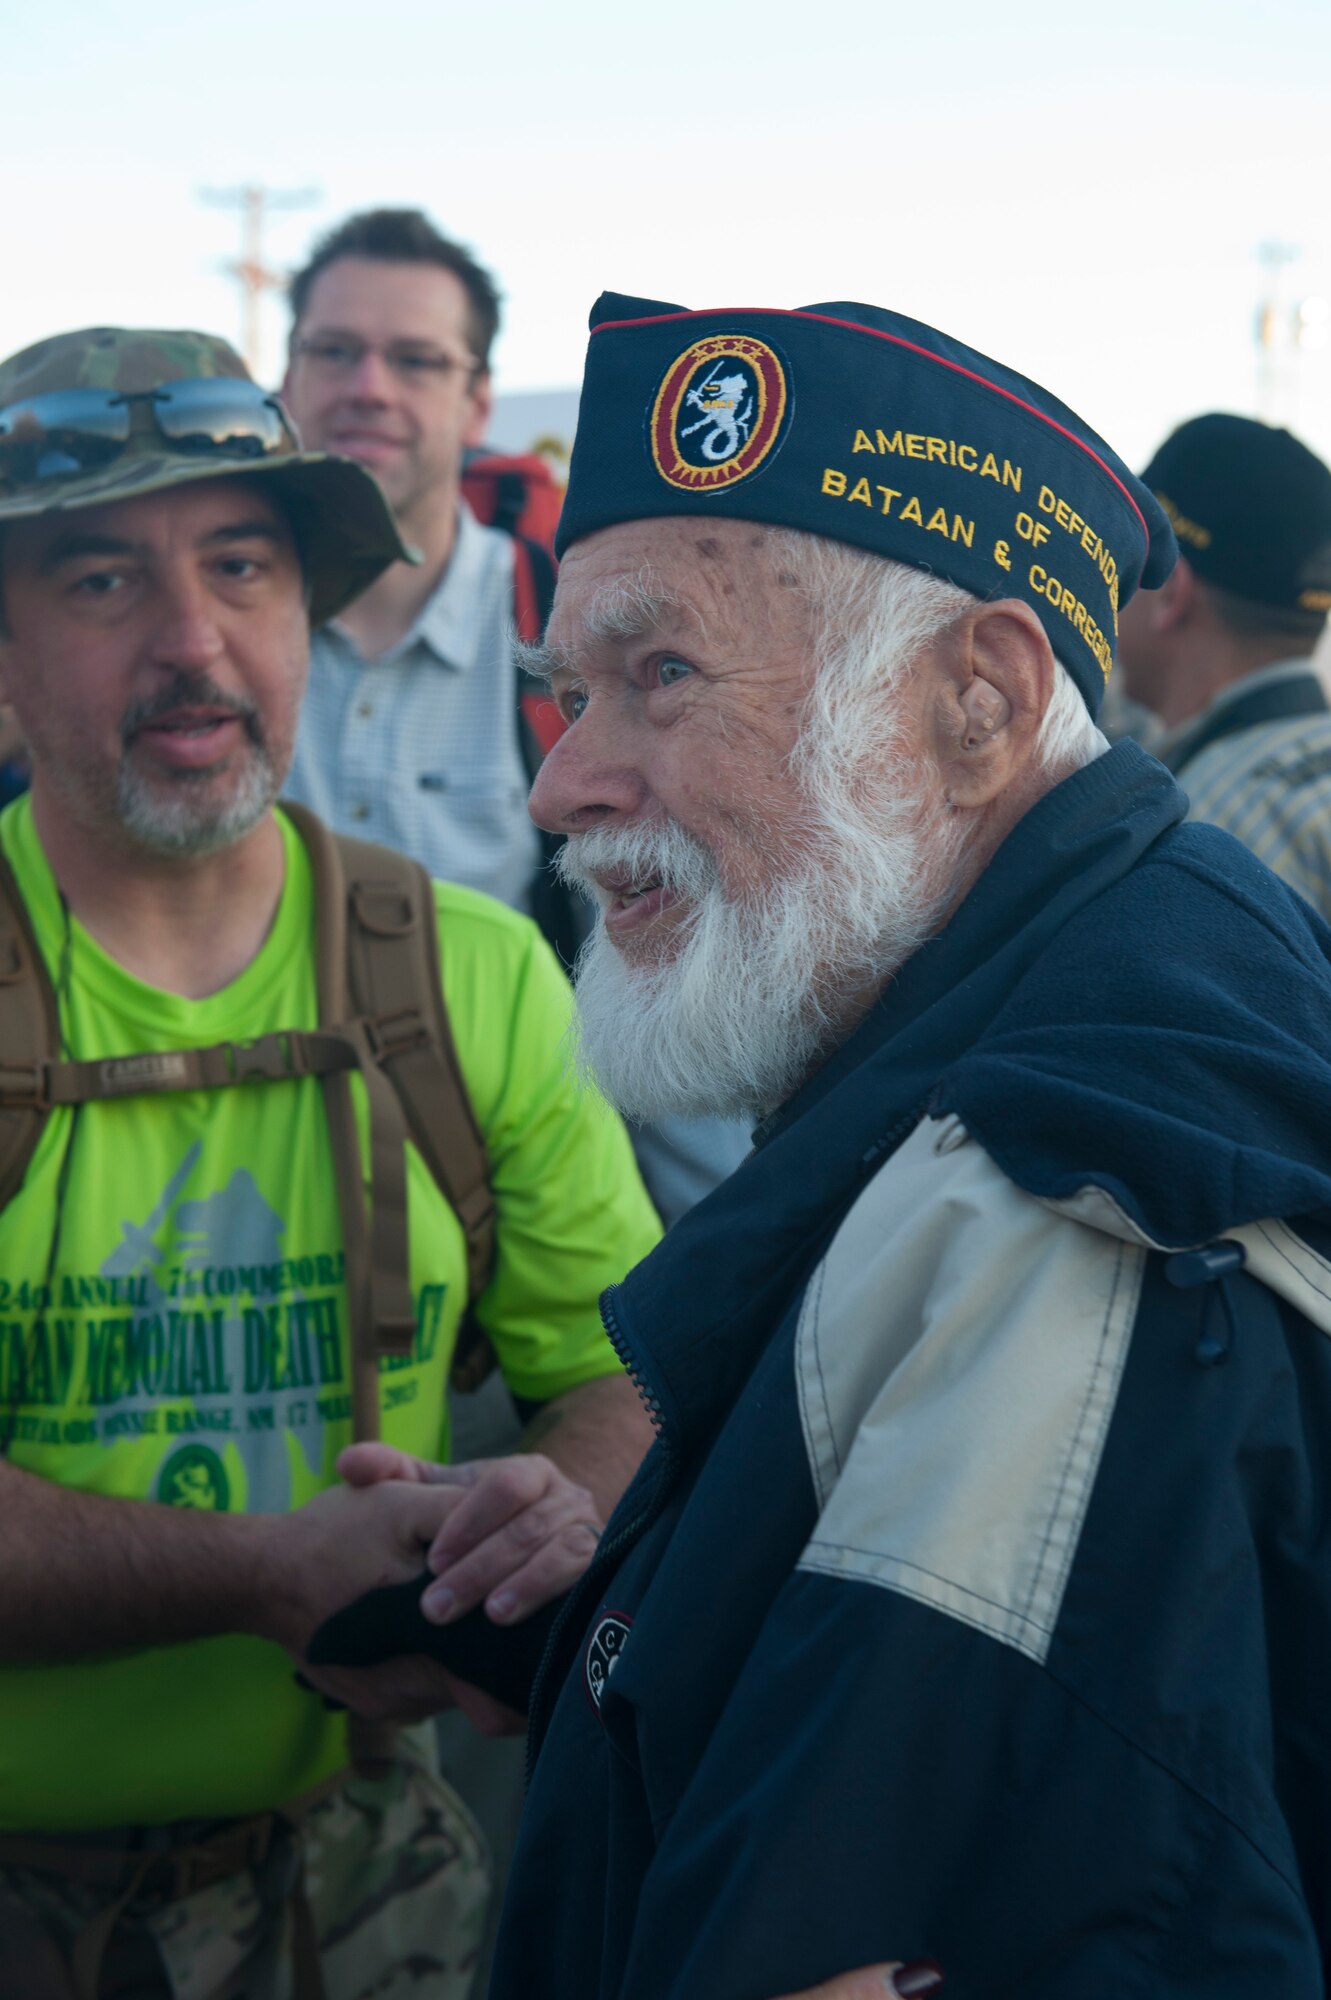 Oscar Leonard a World War ll survivor, stands at the start line and shakes hands with the participants in the 24th annual Bataan Memorial Death March at White Sands Missile Range, N.M., March 17. Over 5,800 people came to honor more than 76,000 Prisoners Of War/Missing In Action from Bataan and Corregidor during World War ll. The 26.2-mile course starts on WSMR, enters hilly terrain and finishes through sandy desert trails, with elevation ranging from 4,100-5,300 feet. This year 13 veterans from World War ll attended the event. (U.S. Air Force photo by Airman Leah Murray/Released)